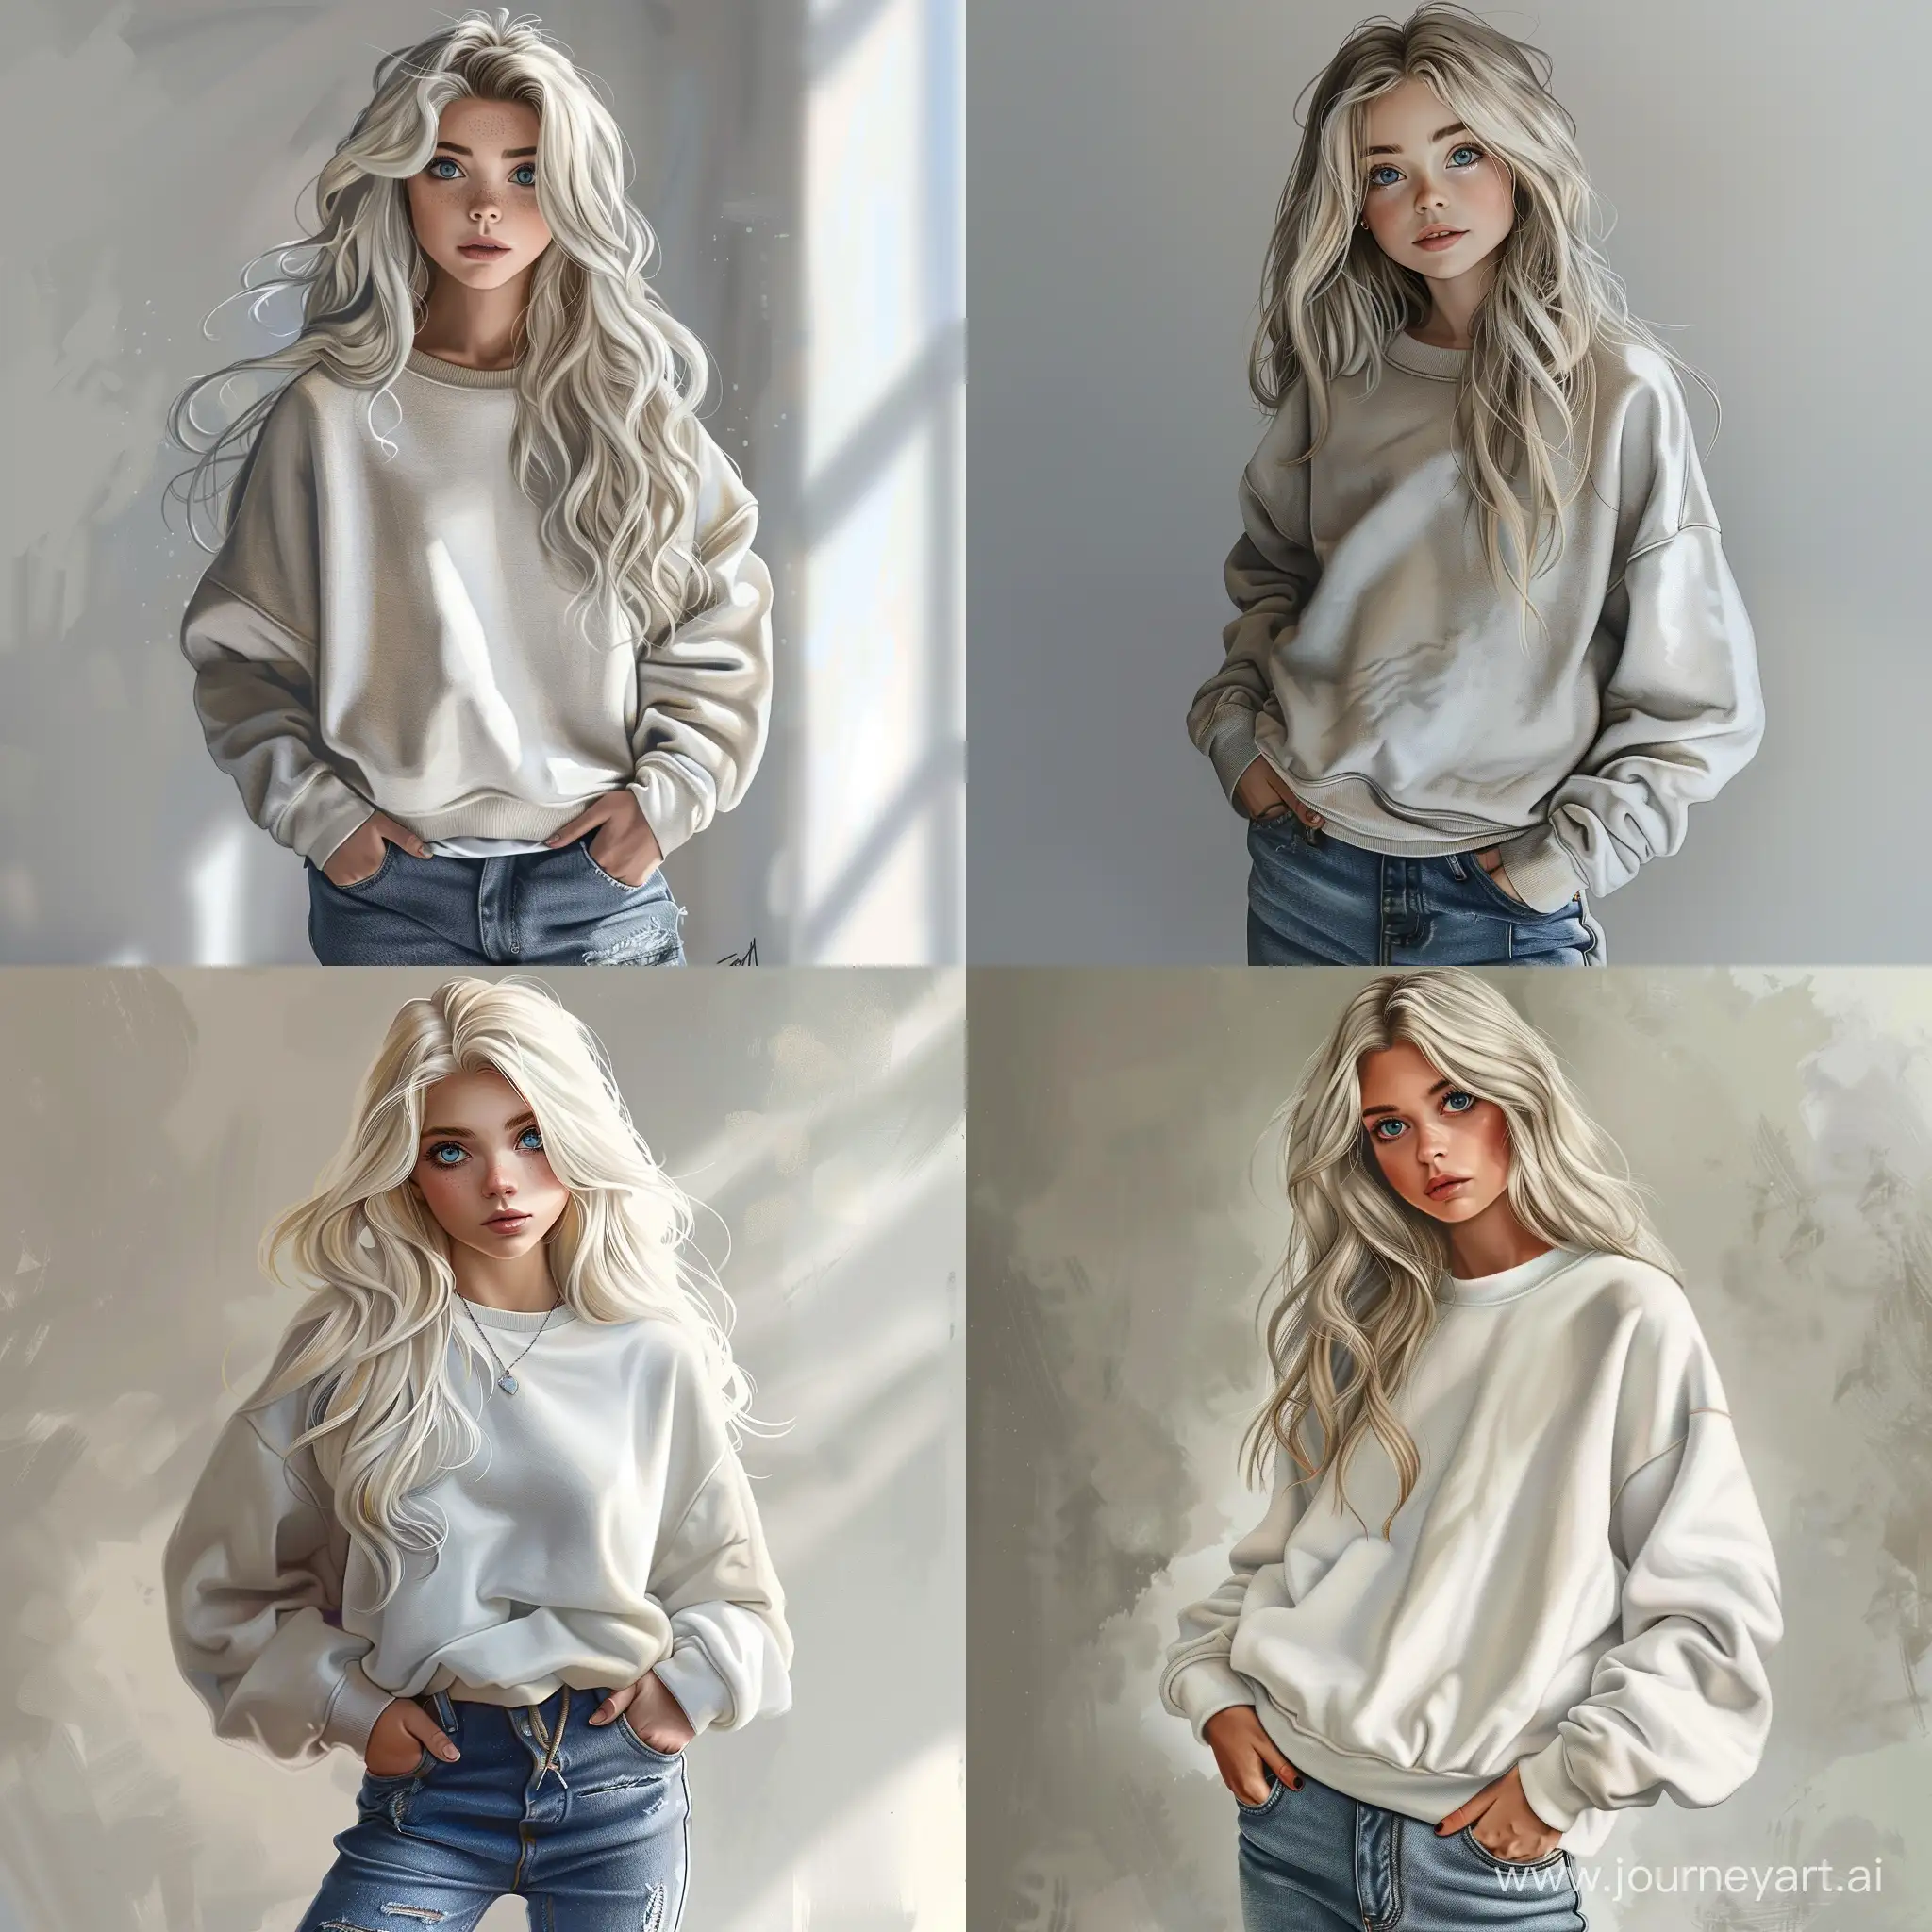 Beautiful girl, blonde hair, gray-blue eyes, white skin, teenager, 15 years old, jeans and oversize sweatshirt, high quality, high detail, realistic art